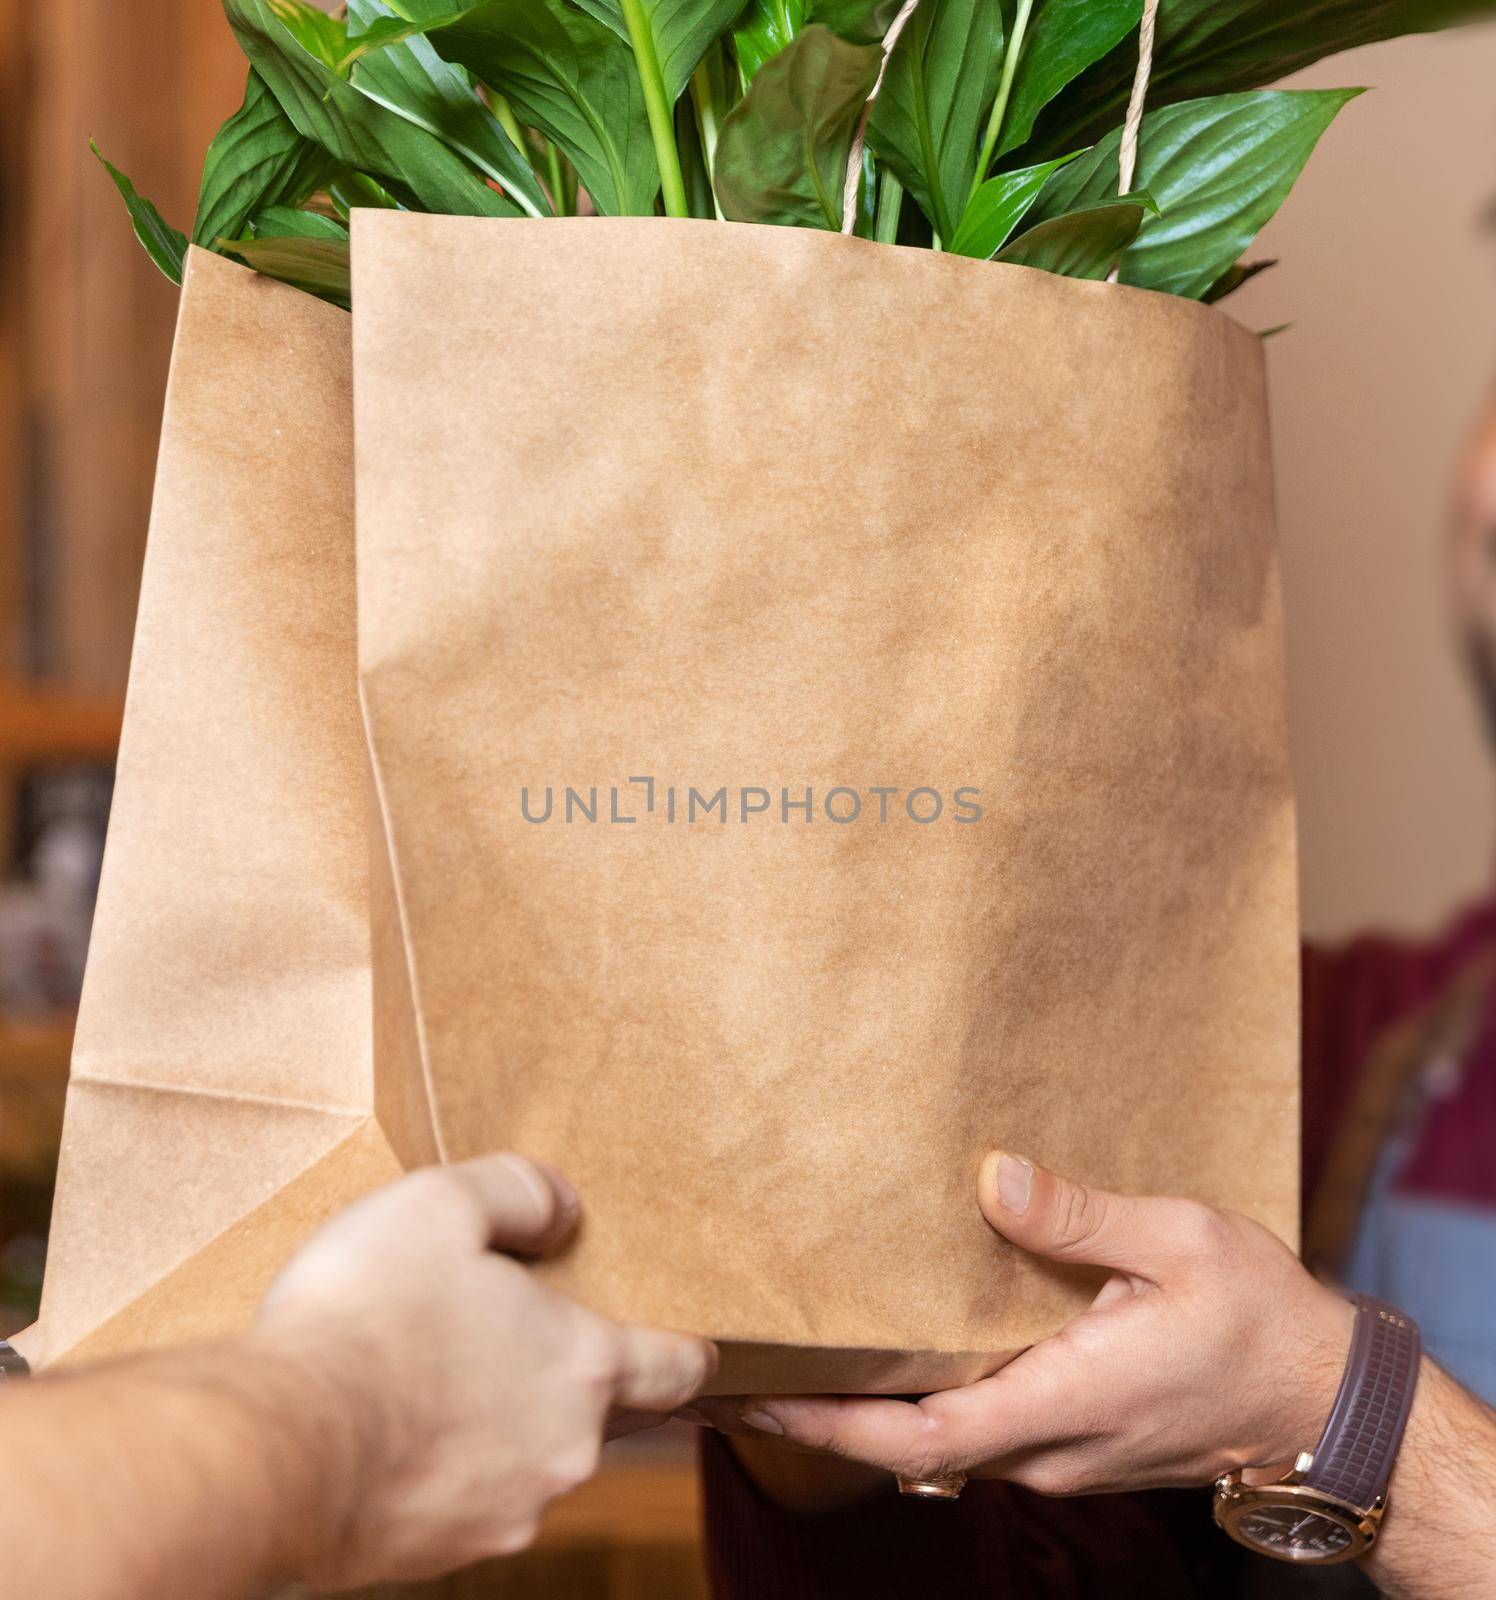 Garden store worker giving shopping bag to the client, plant inside